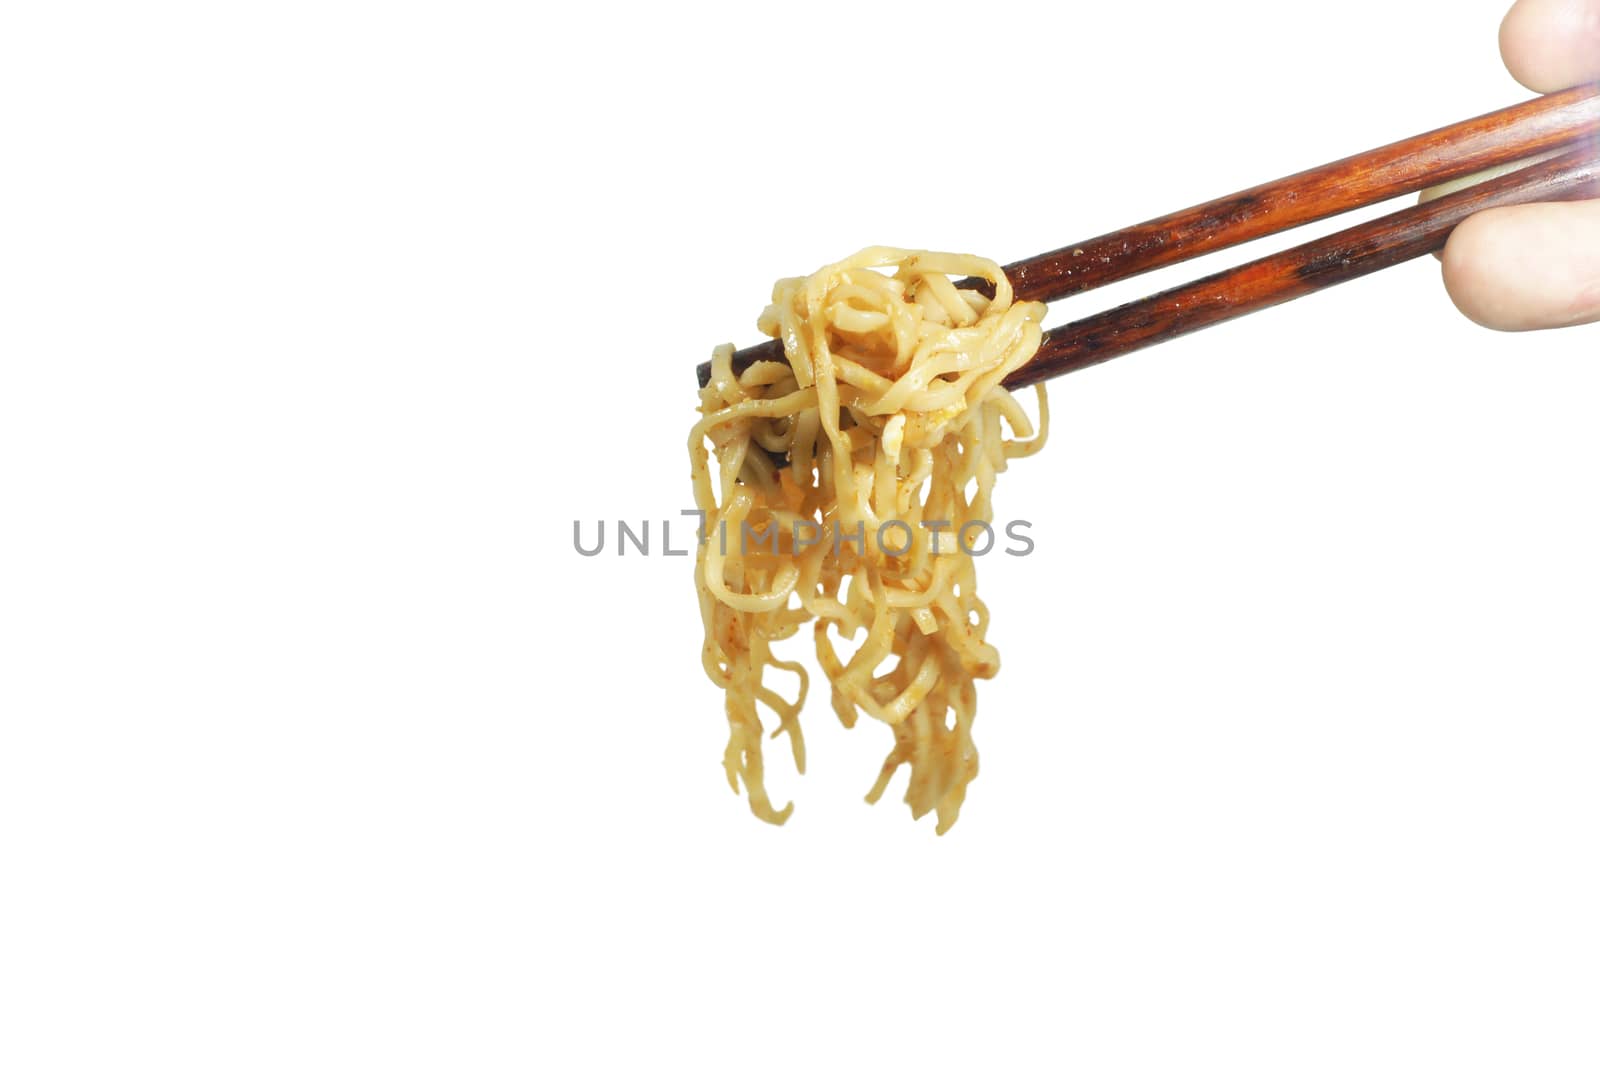 Chopsticks with spicy noodles on white background